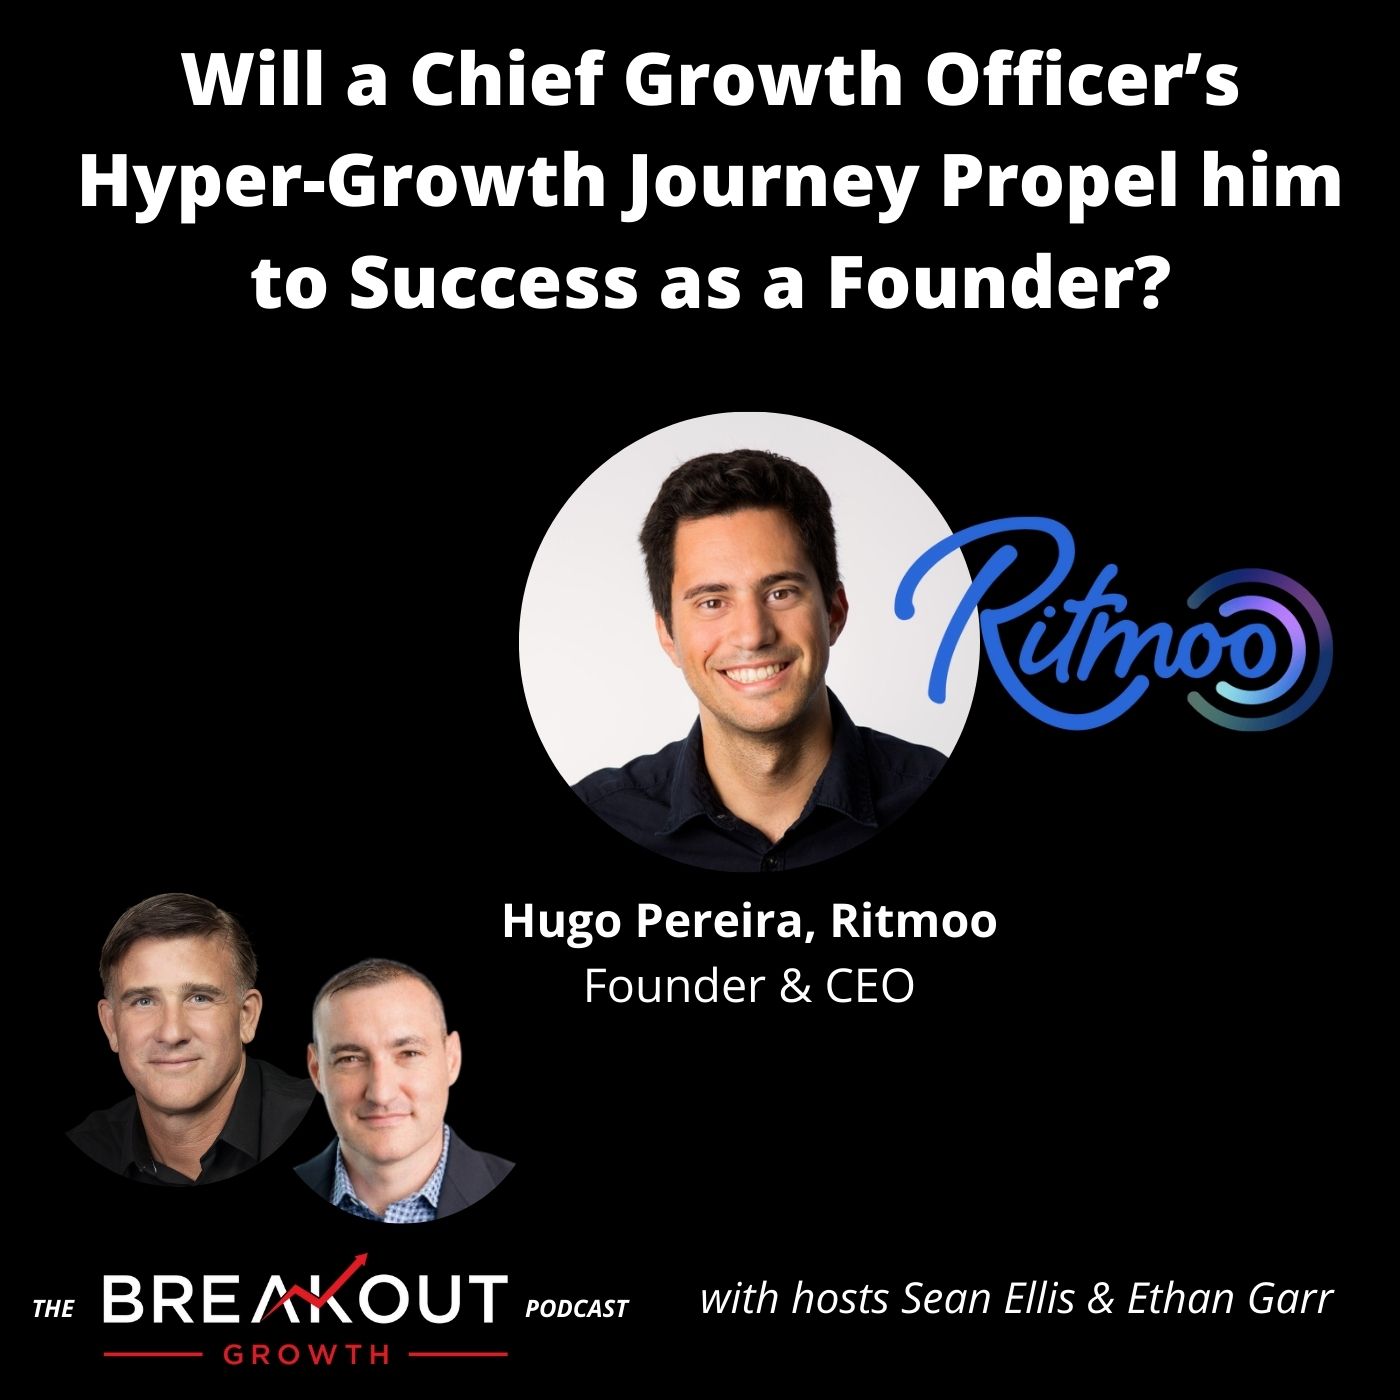 Will a Chief Growth Officer’s Hyper-Growth Journey Propel him to Success as a Founder?